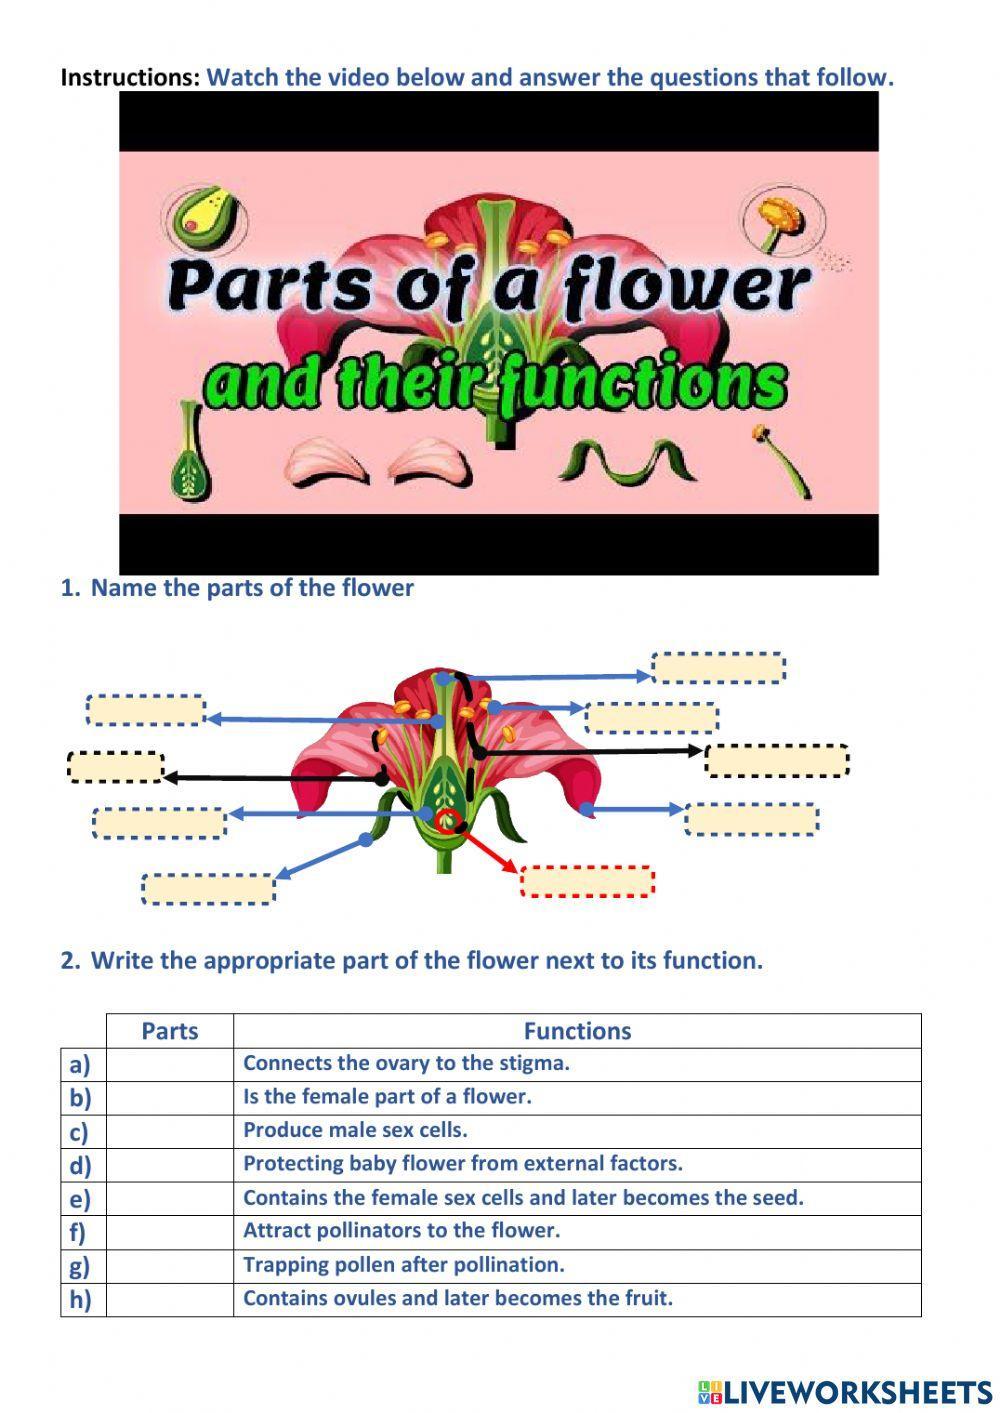 Parts of a flower and their functions